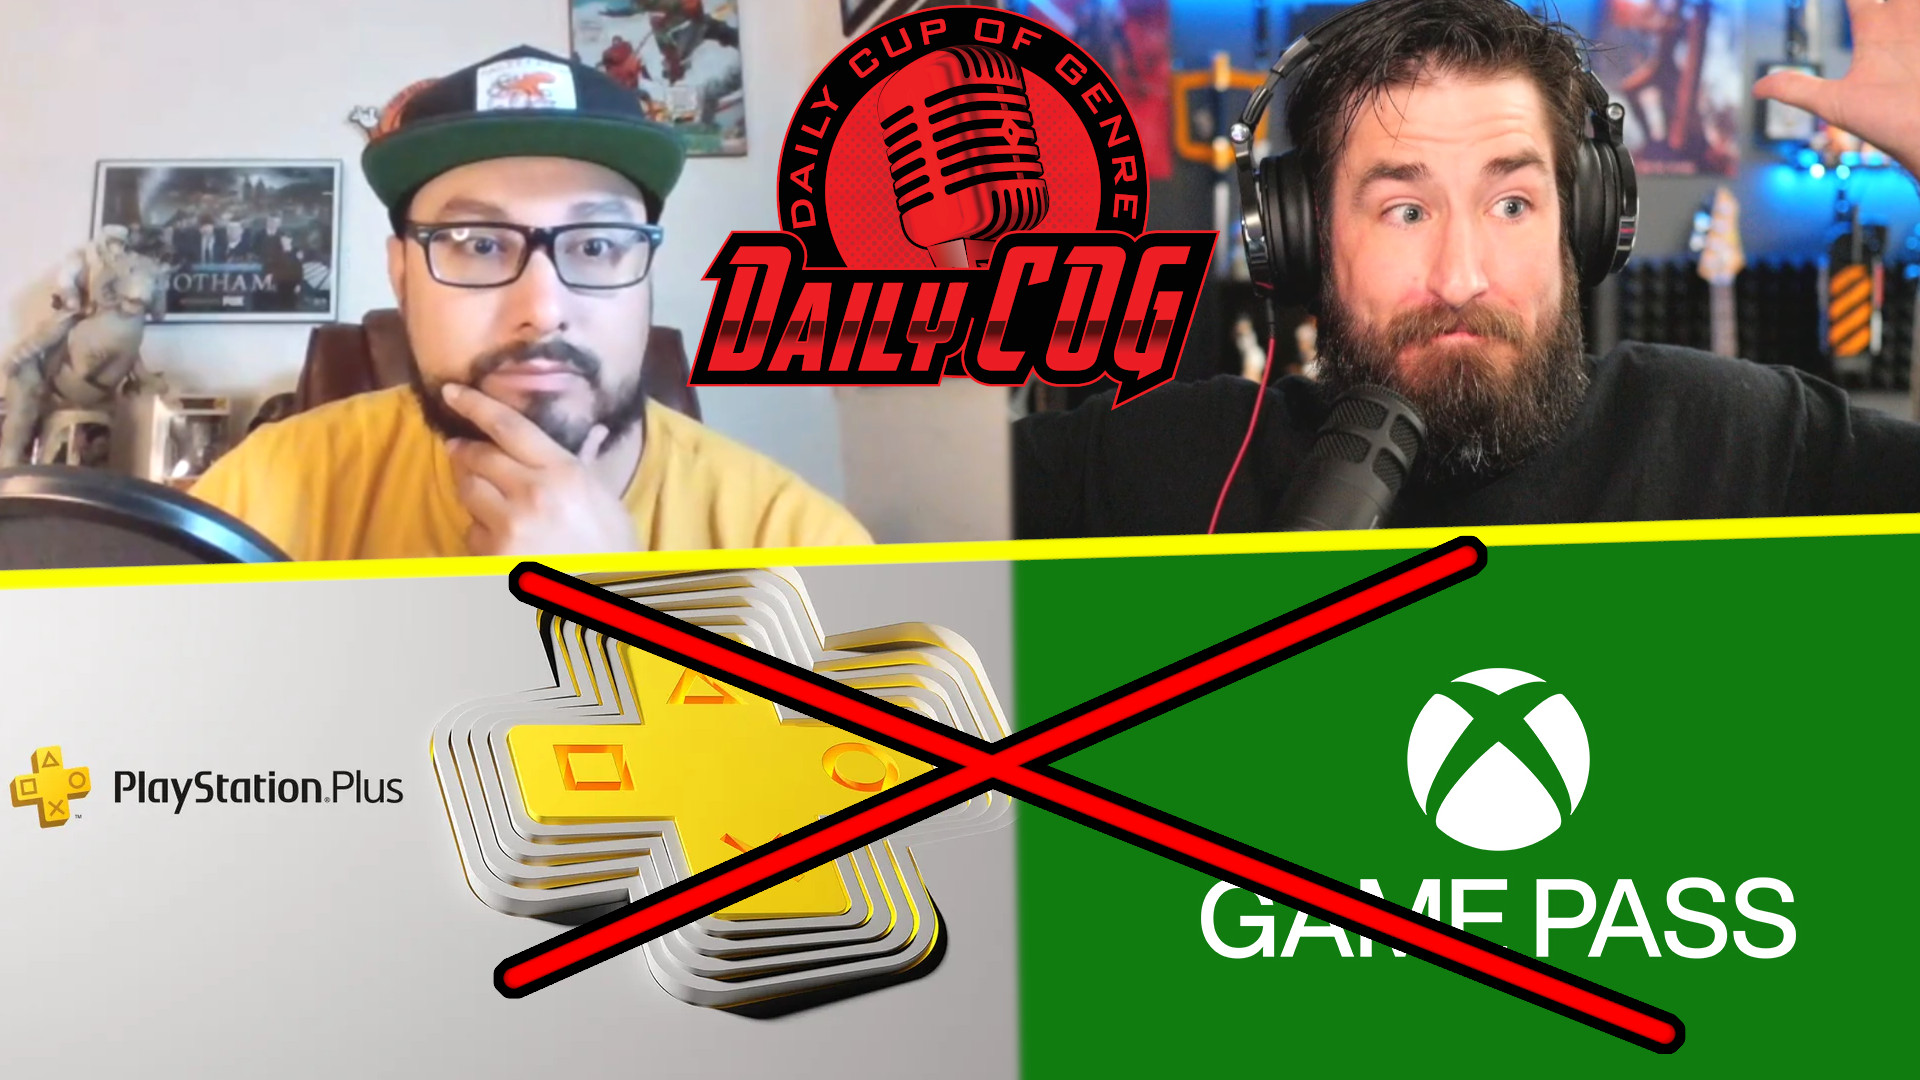 Gaming Subscription Services Are A Bad Idea & Star Wars Talk | Daily COG